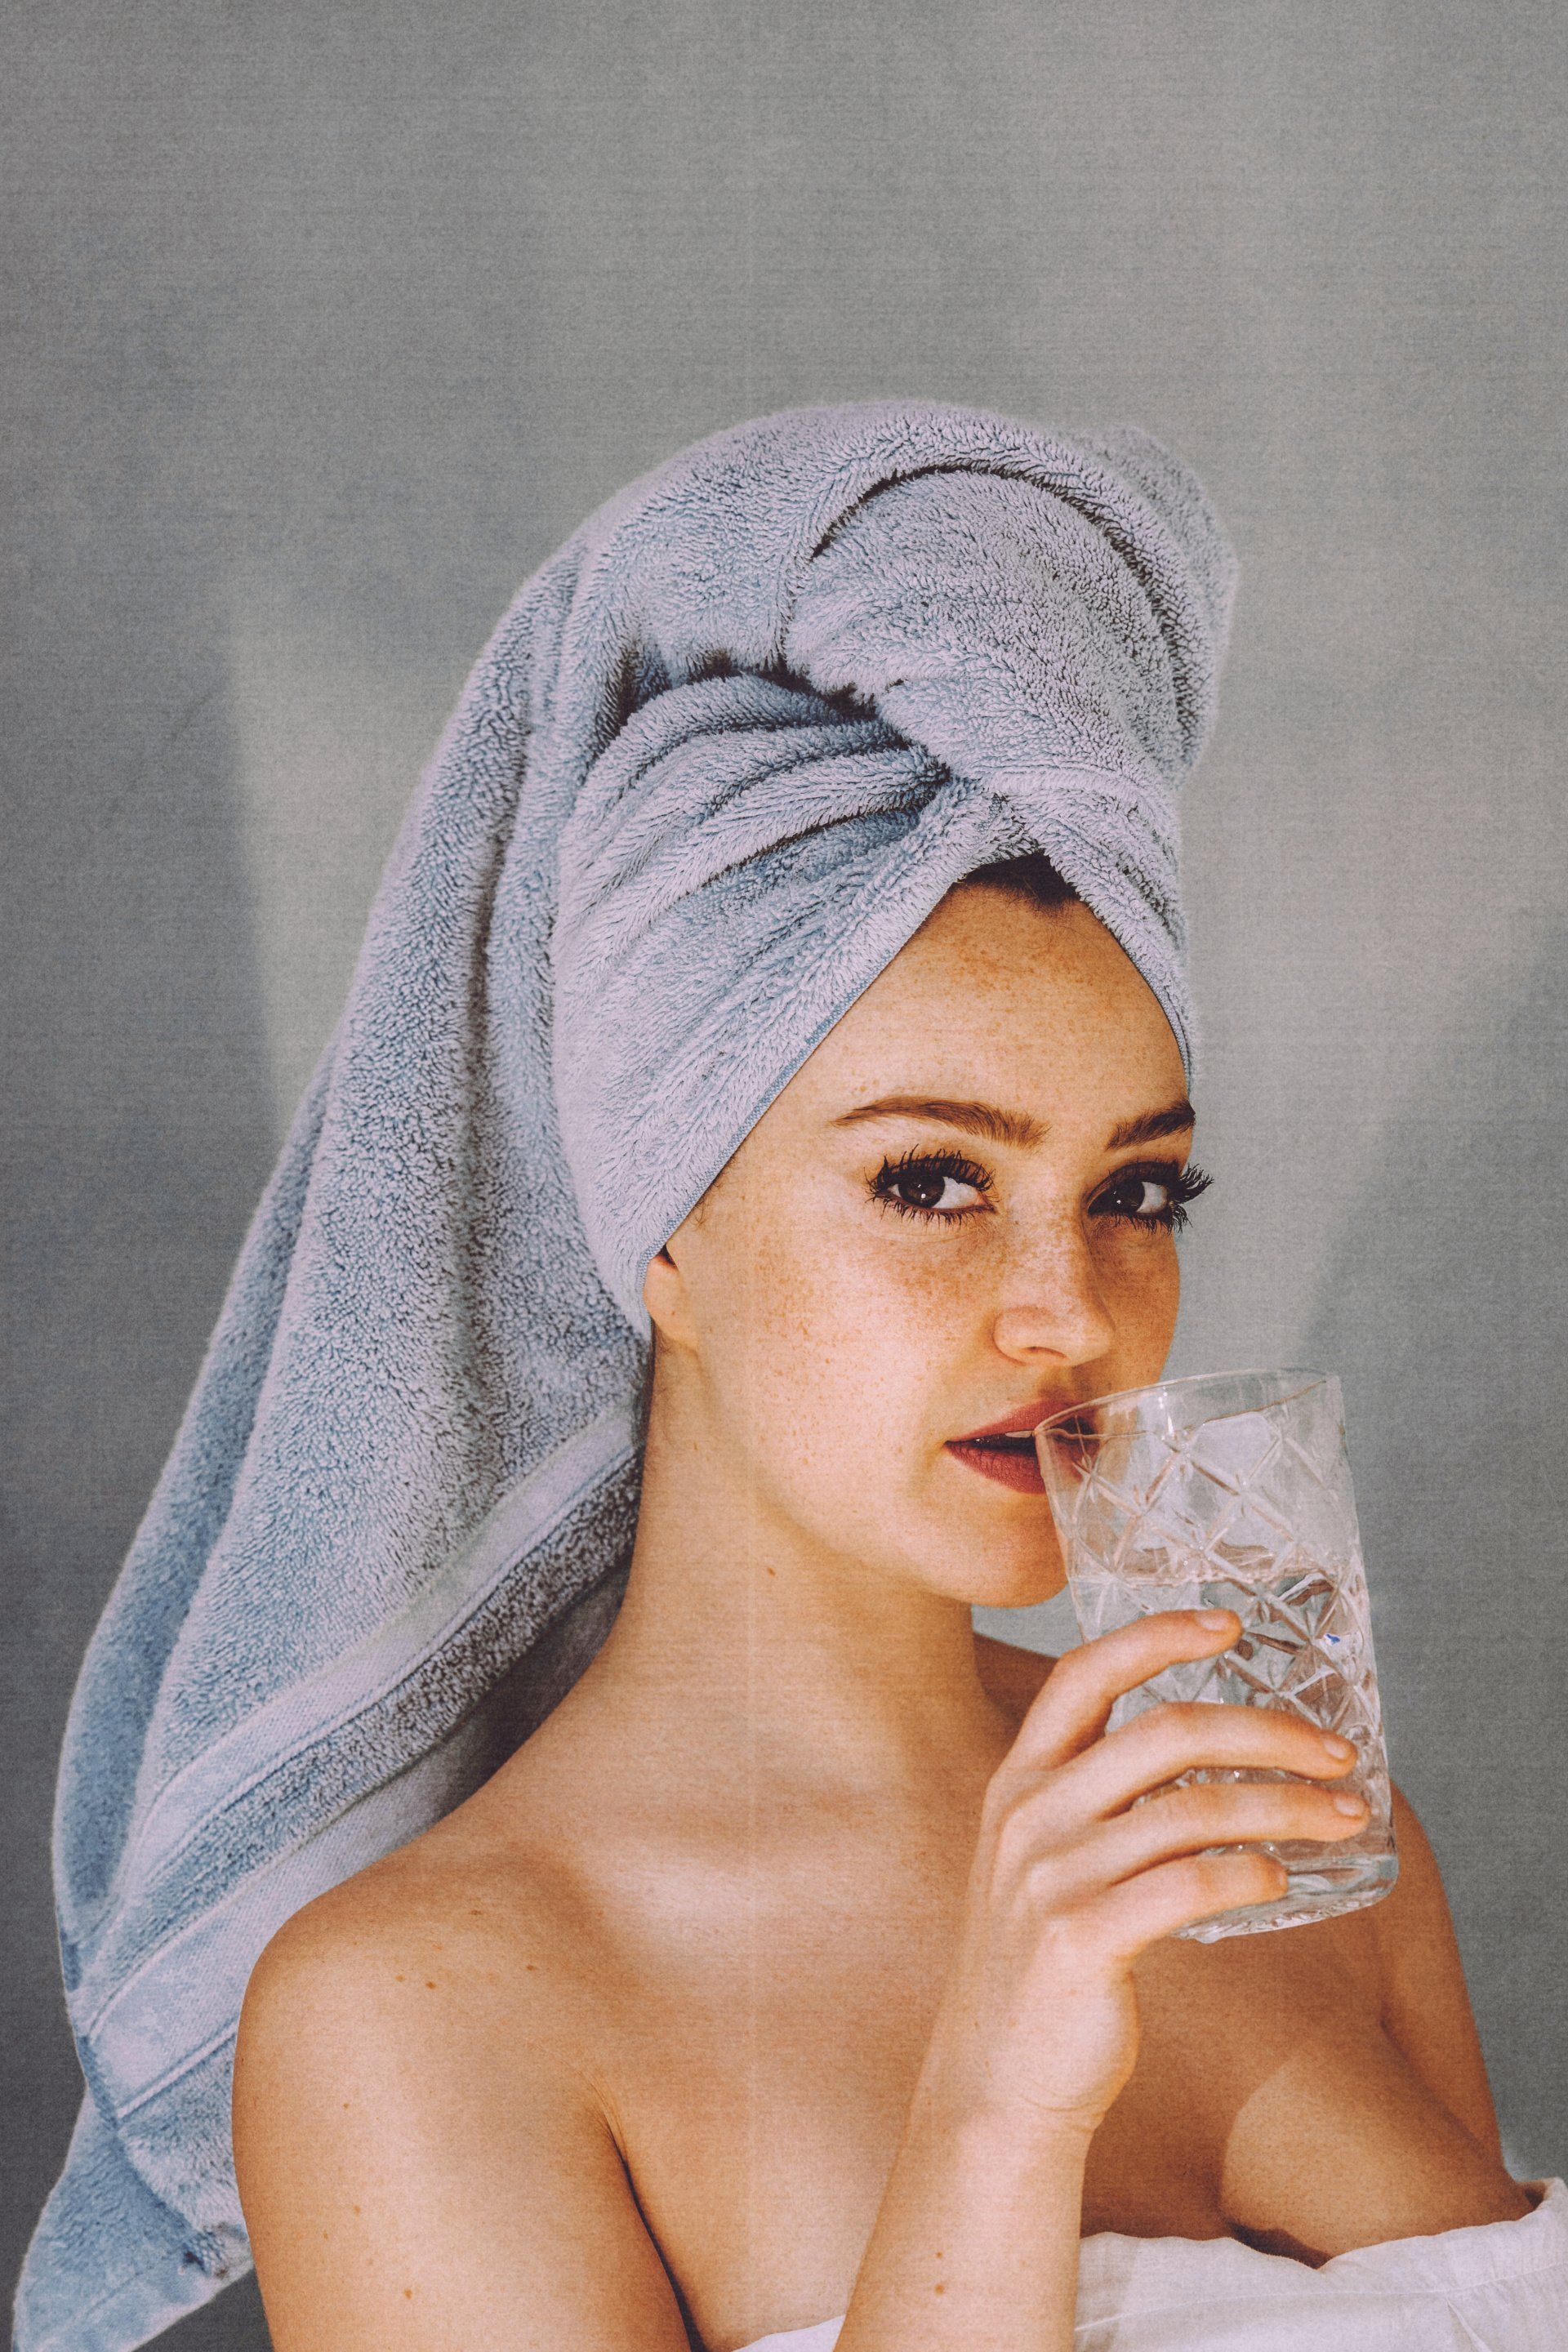 woman holding a glass of water with a towel wrapped around her hair